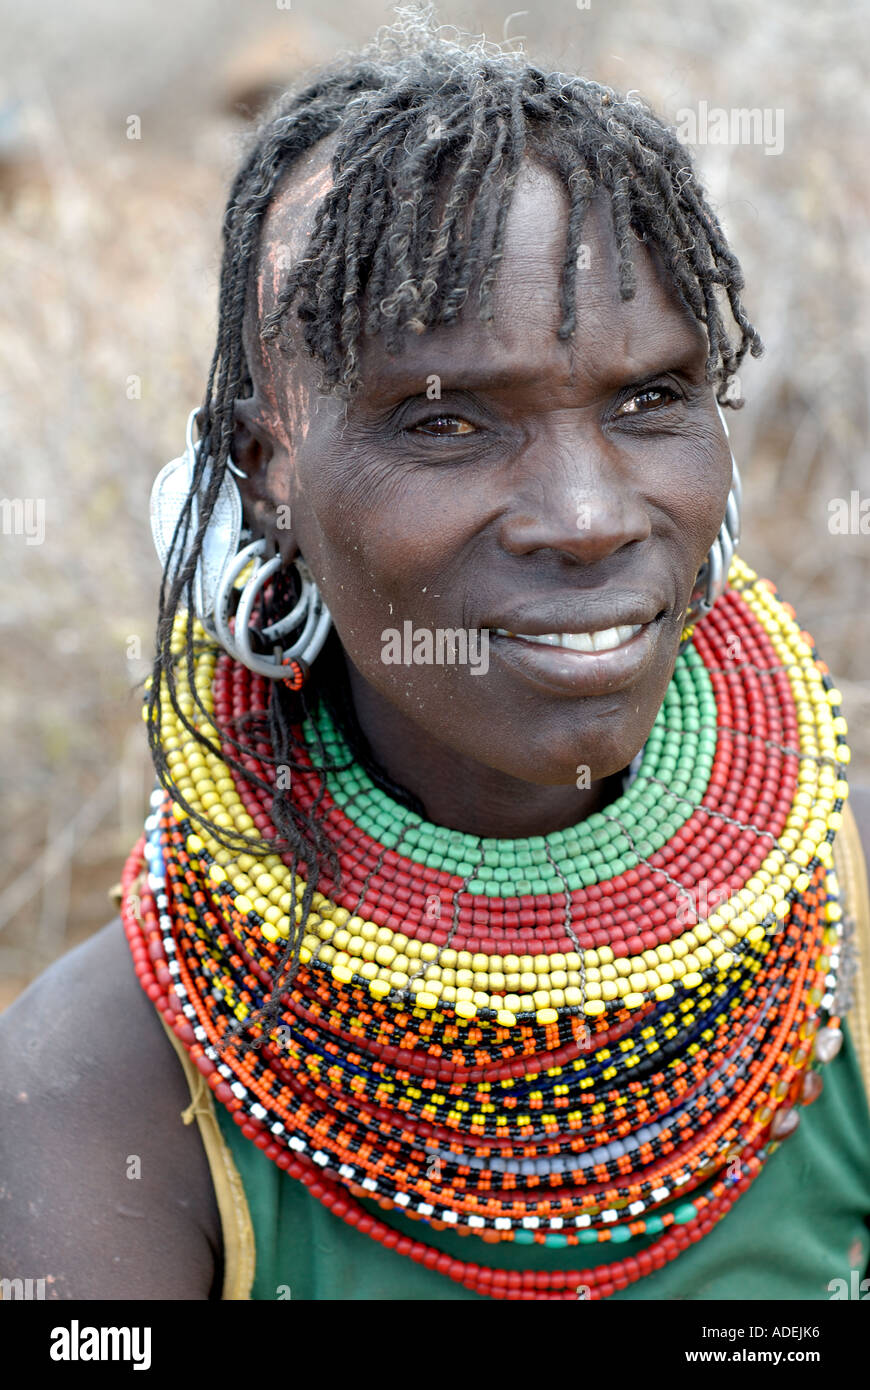 Smiling Turkana woman with traditional hair style and ornaments Northern  Kenya Stock Photo - Alamy